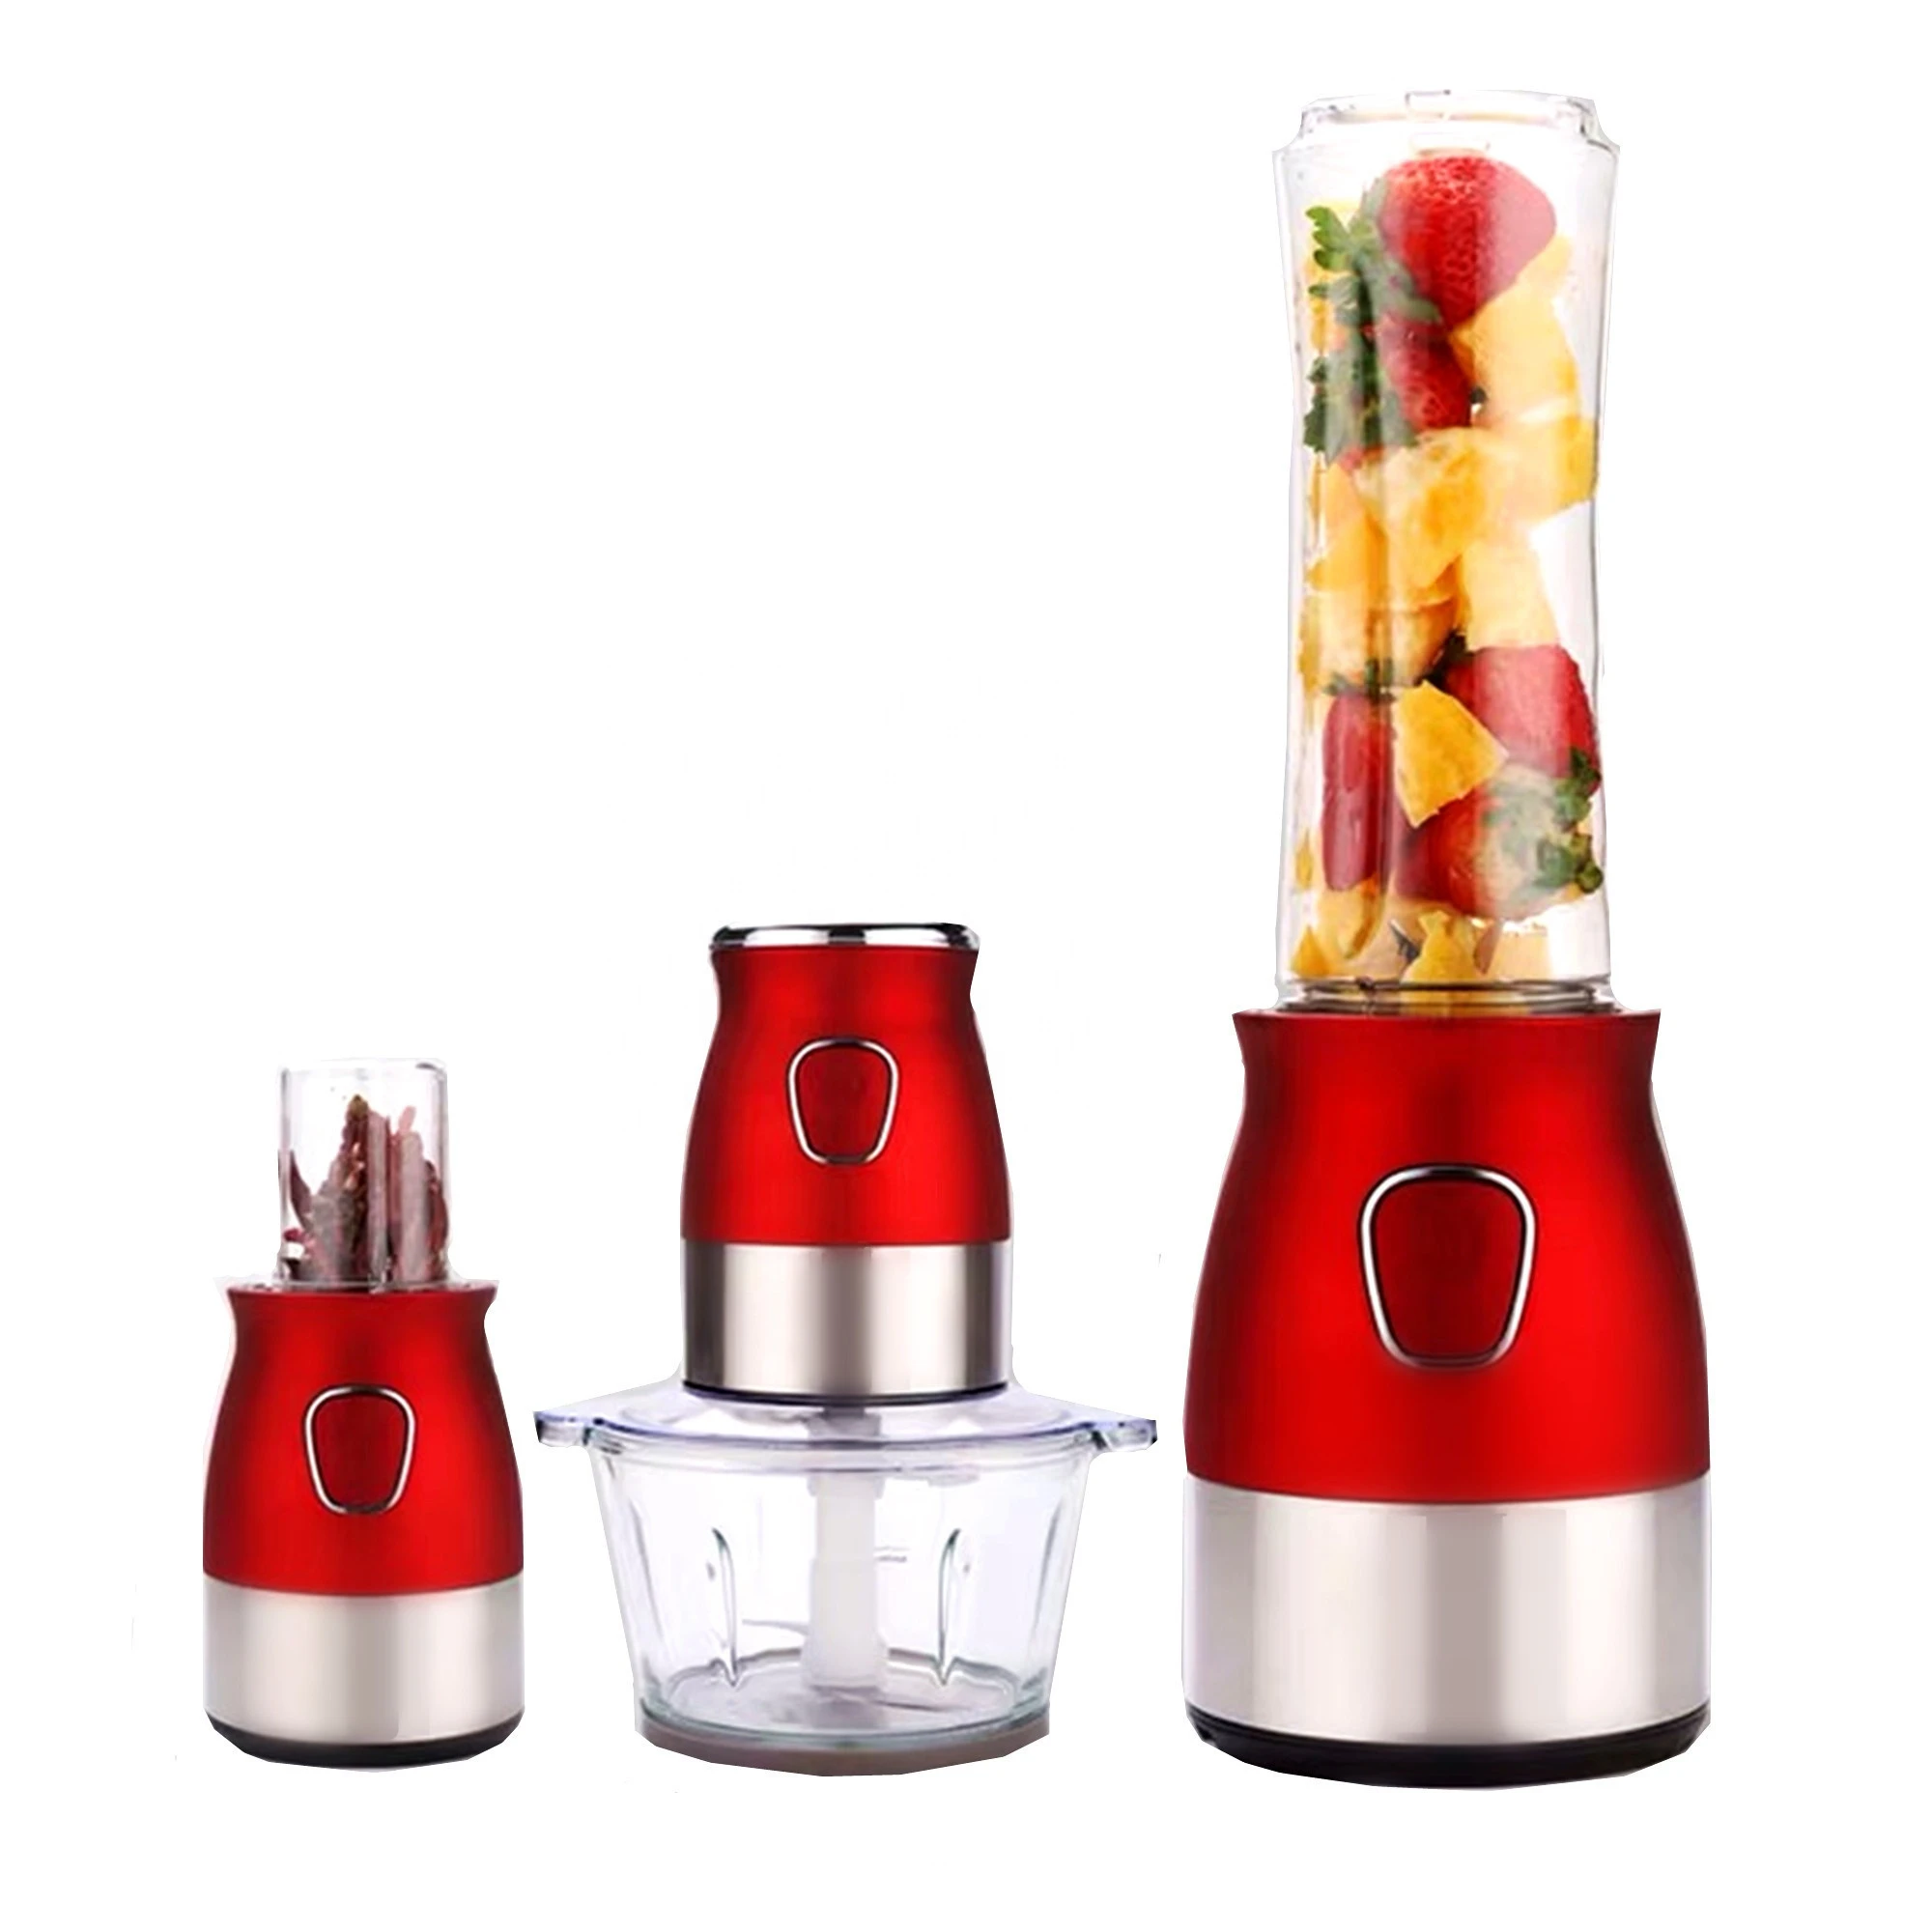 BPA Free glass jar 3 in 1 electric multifunction food processor with chopper blender function